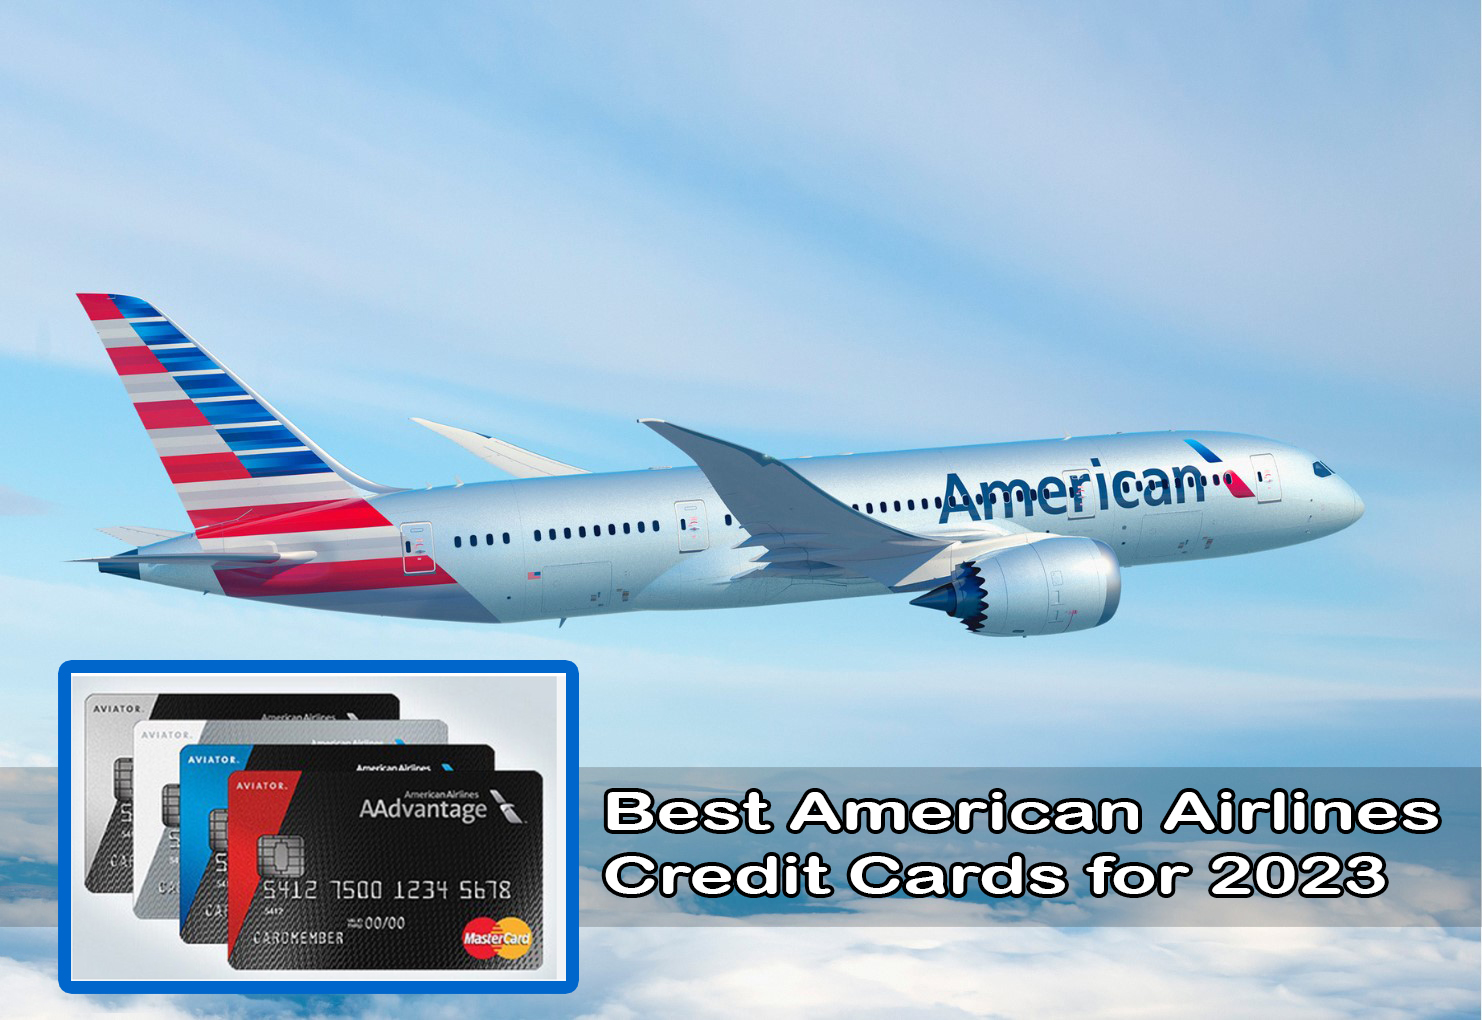 Best American Airlines Credit Cards for 2023